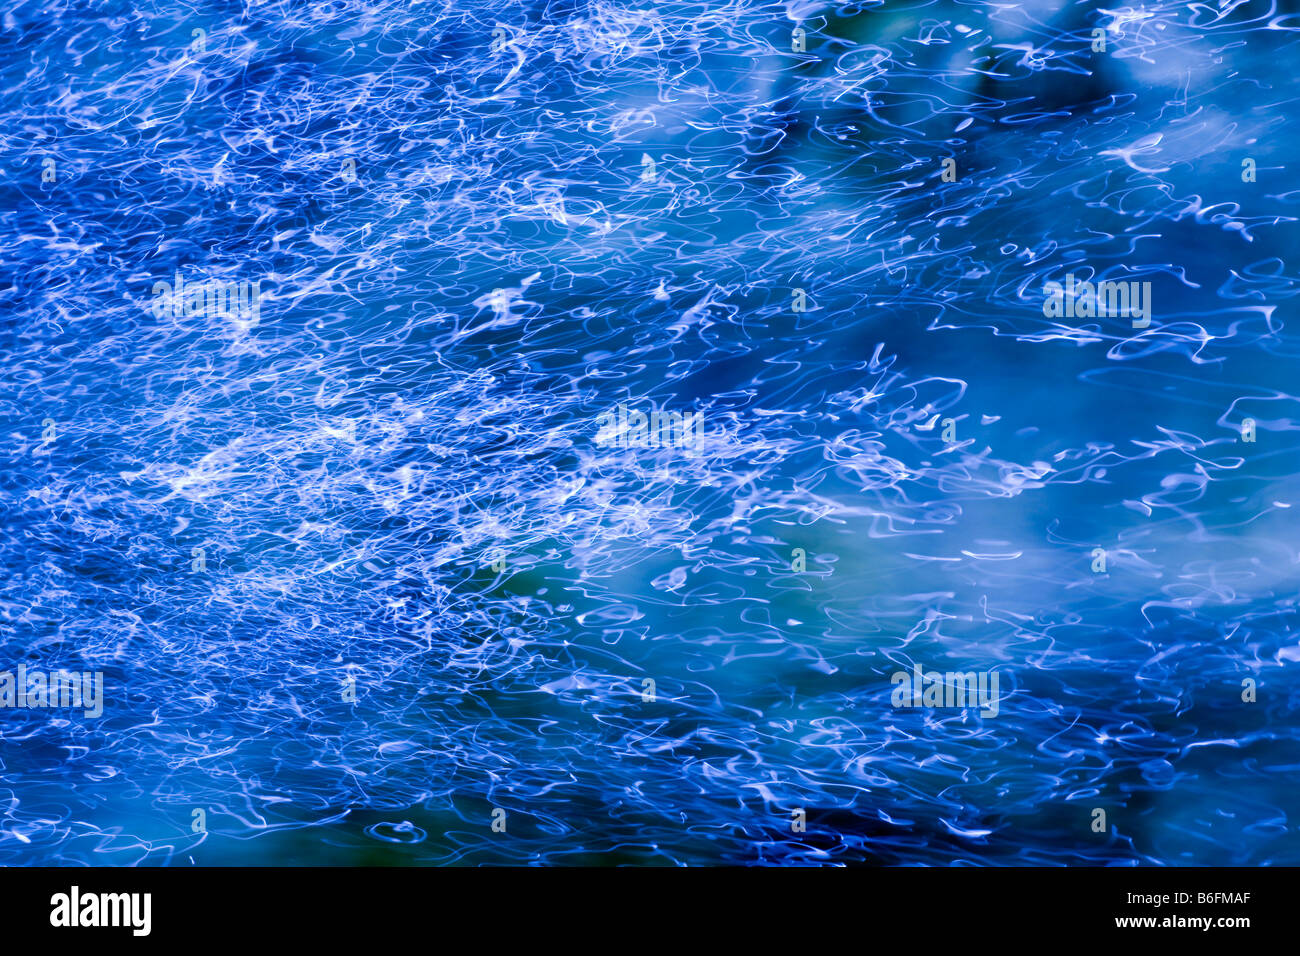 Blue water surface Stock Photo